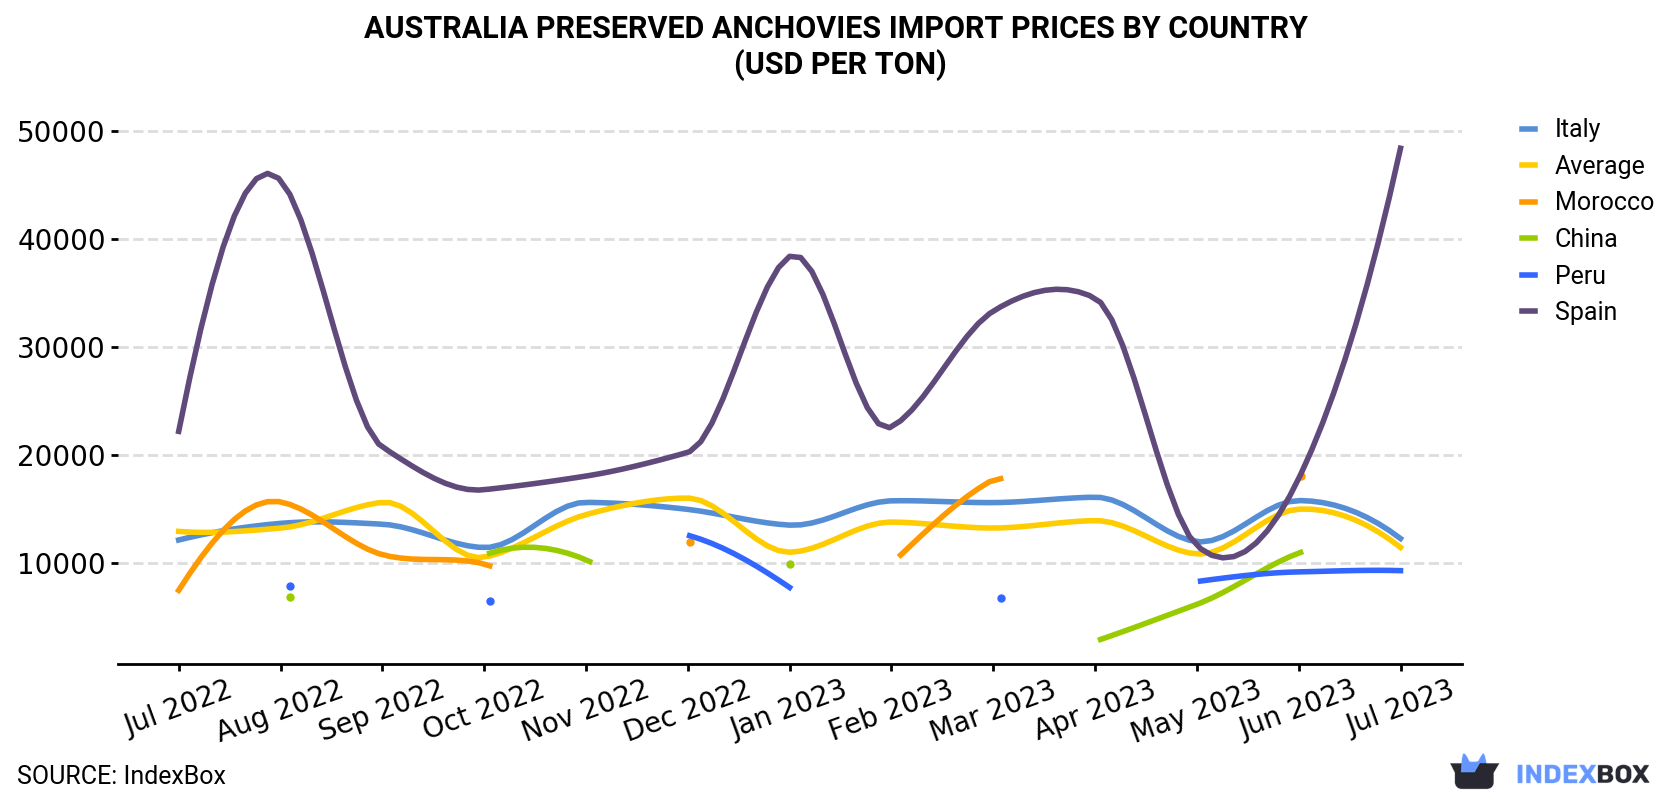 Australia Preserved Anchovies Import Prices By Country (USD Per Ton)